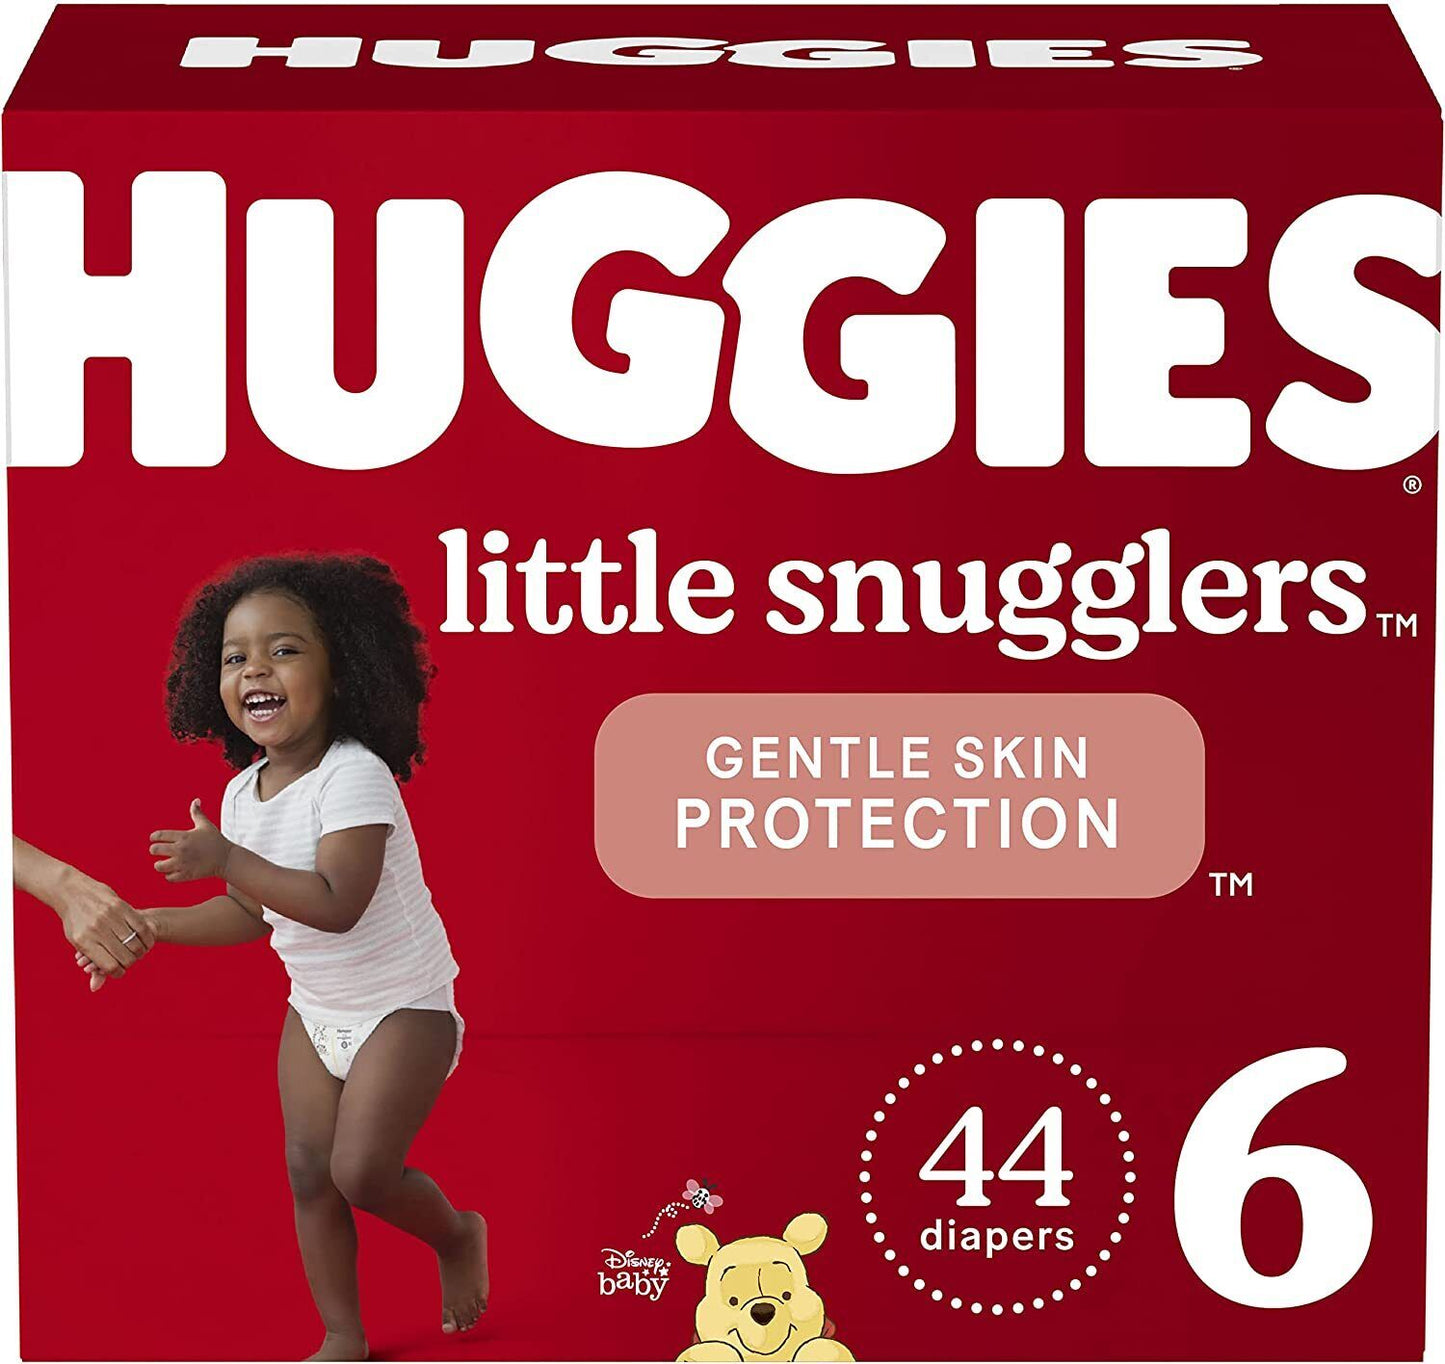 Huggies Little Snugglers Disposable Baby Diapers Size N, 1, 2, 3, 4, 5, 6